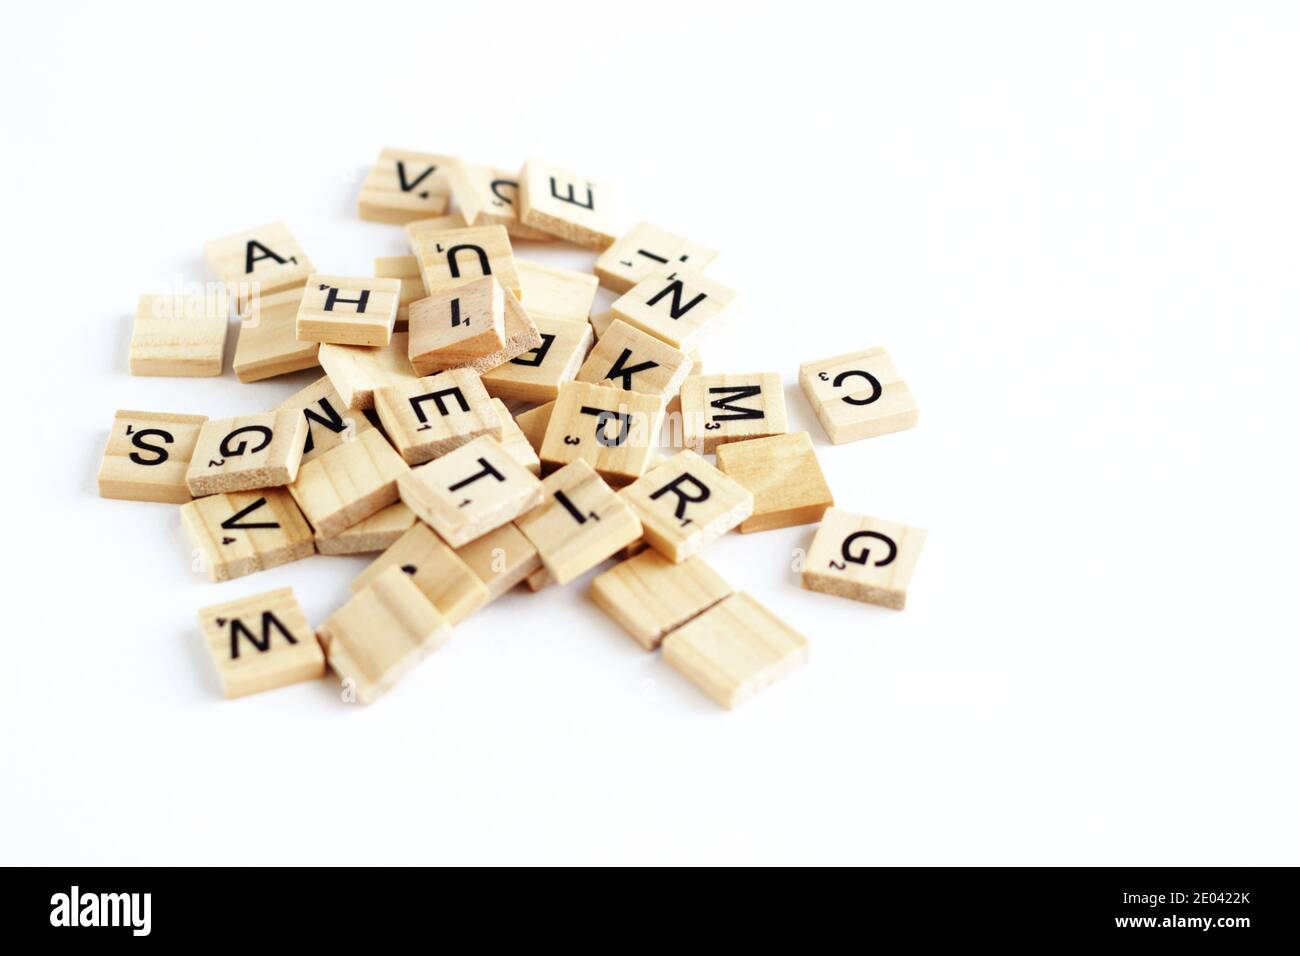 St.Petersburg Russia, 29.06.2019: Board game concept. Wooden Scrabble letter tiles on white background. Stock Photo